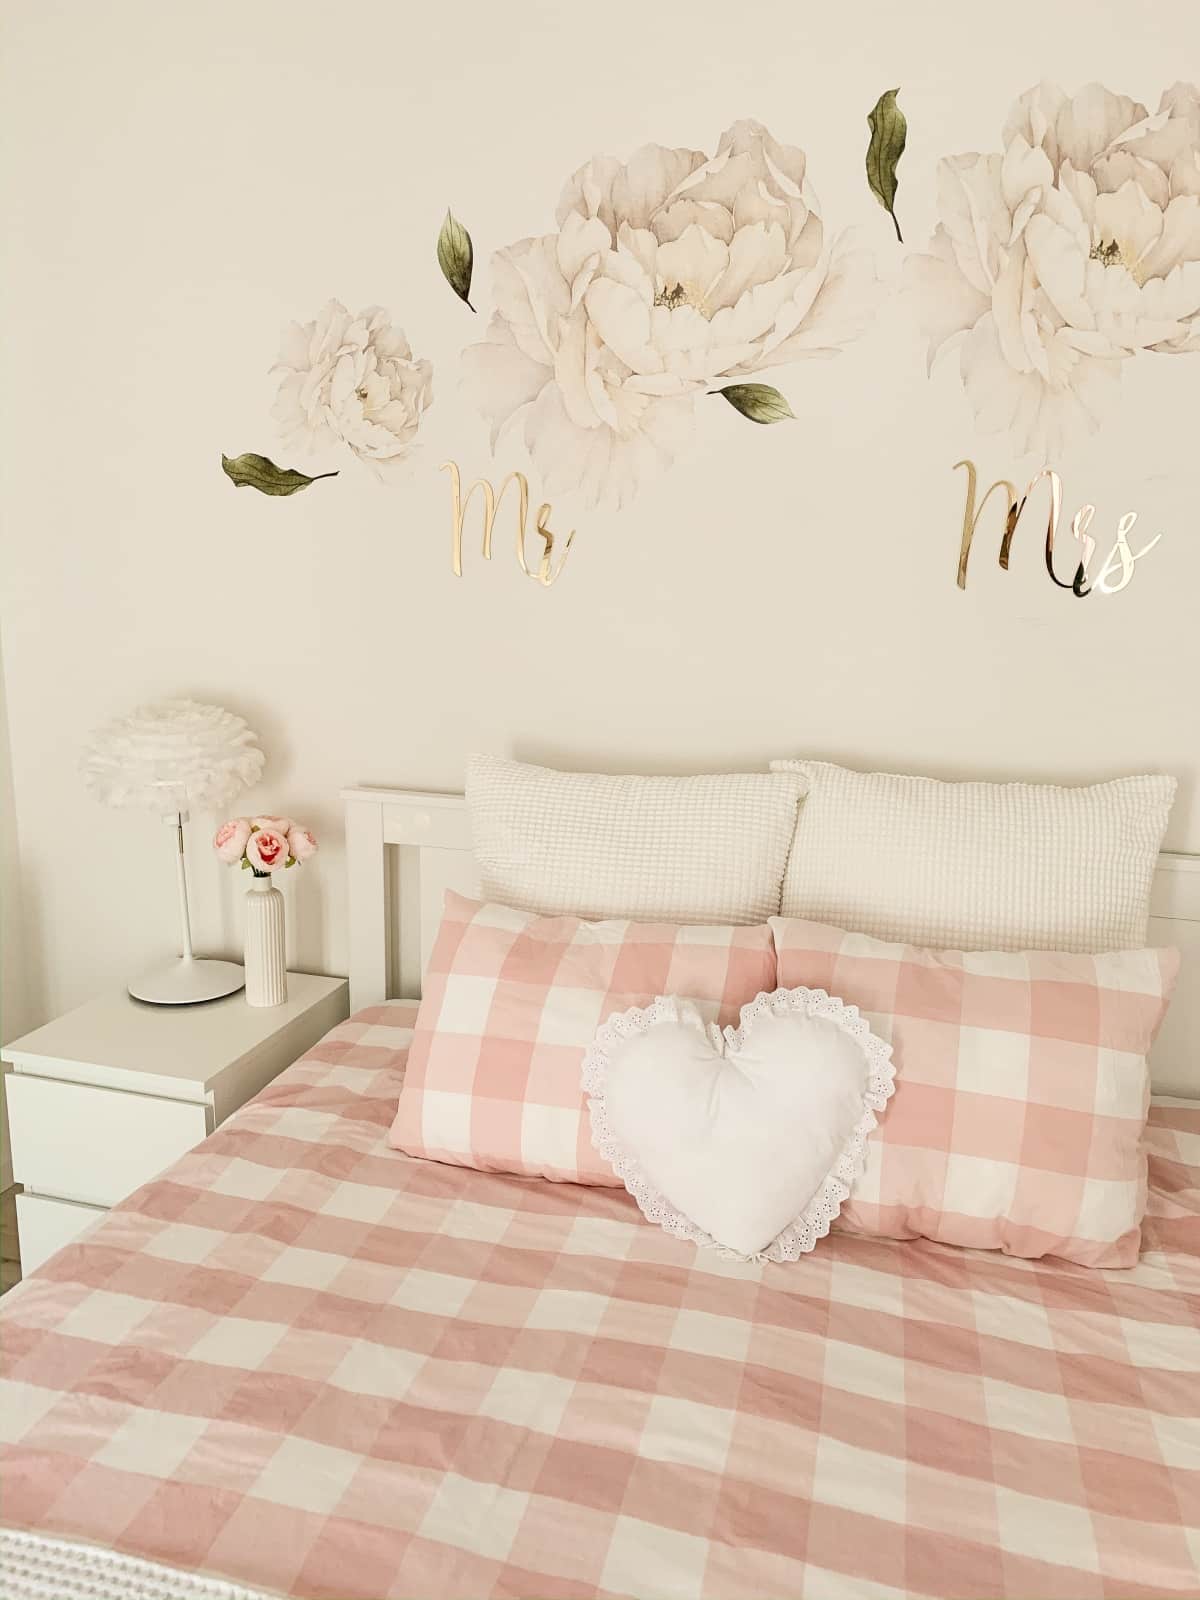 Bedroom with wall decals and pink-and-white plaid bedding